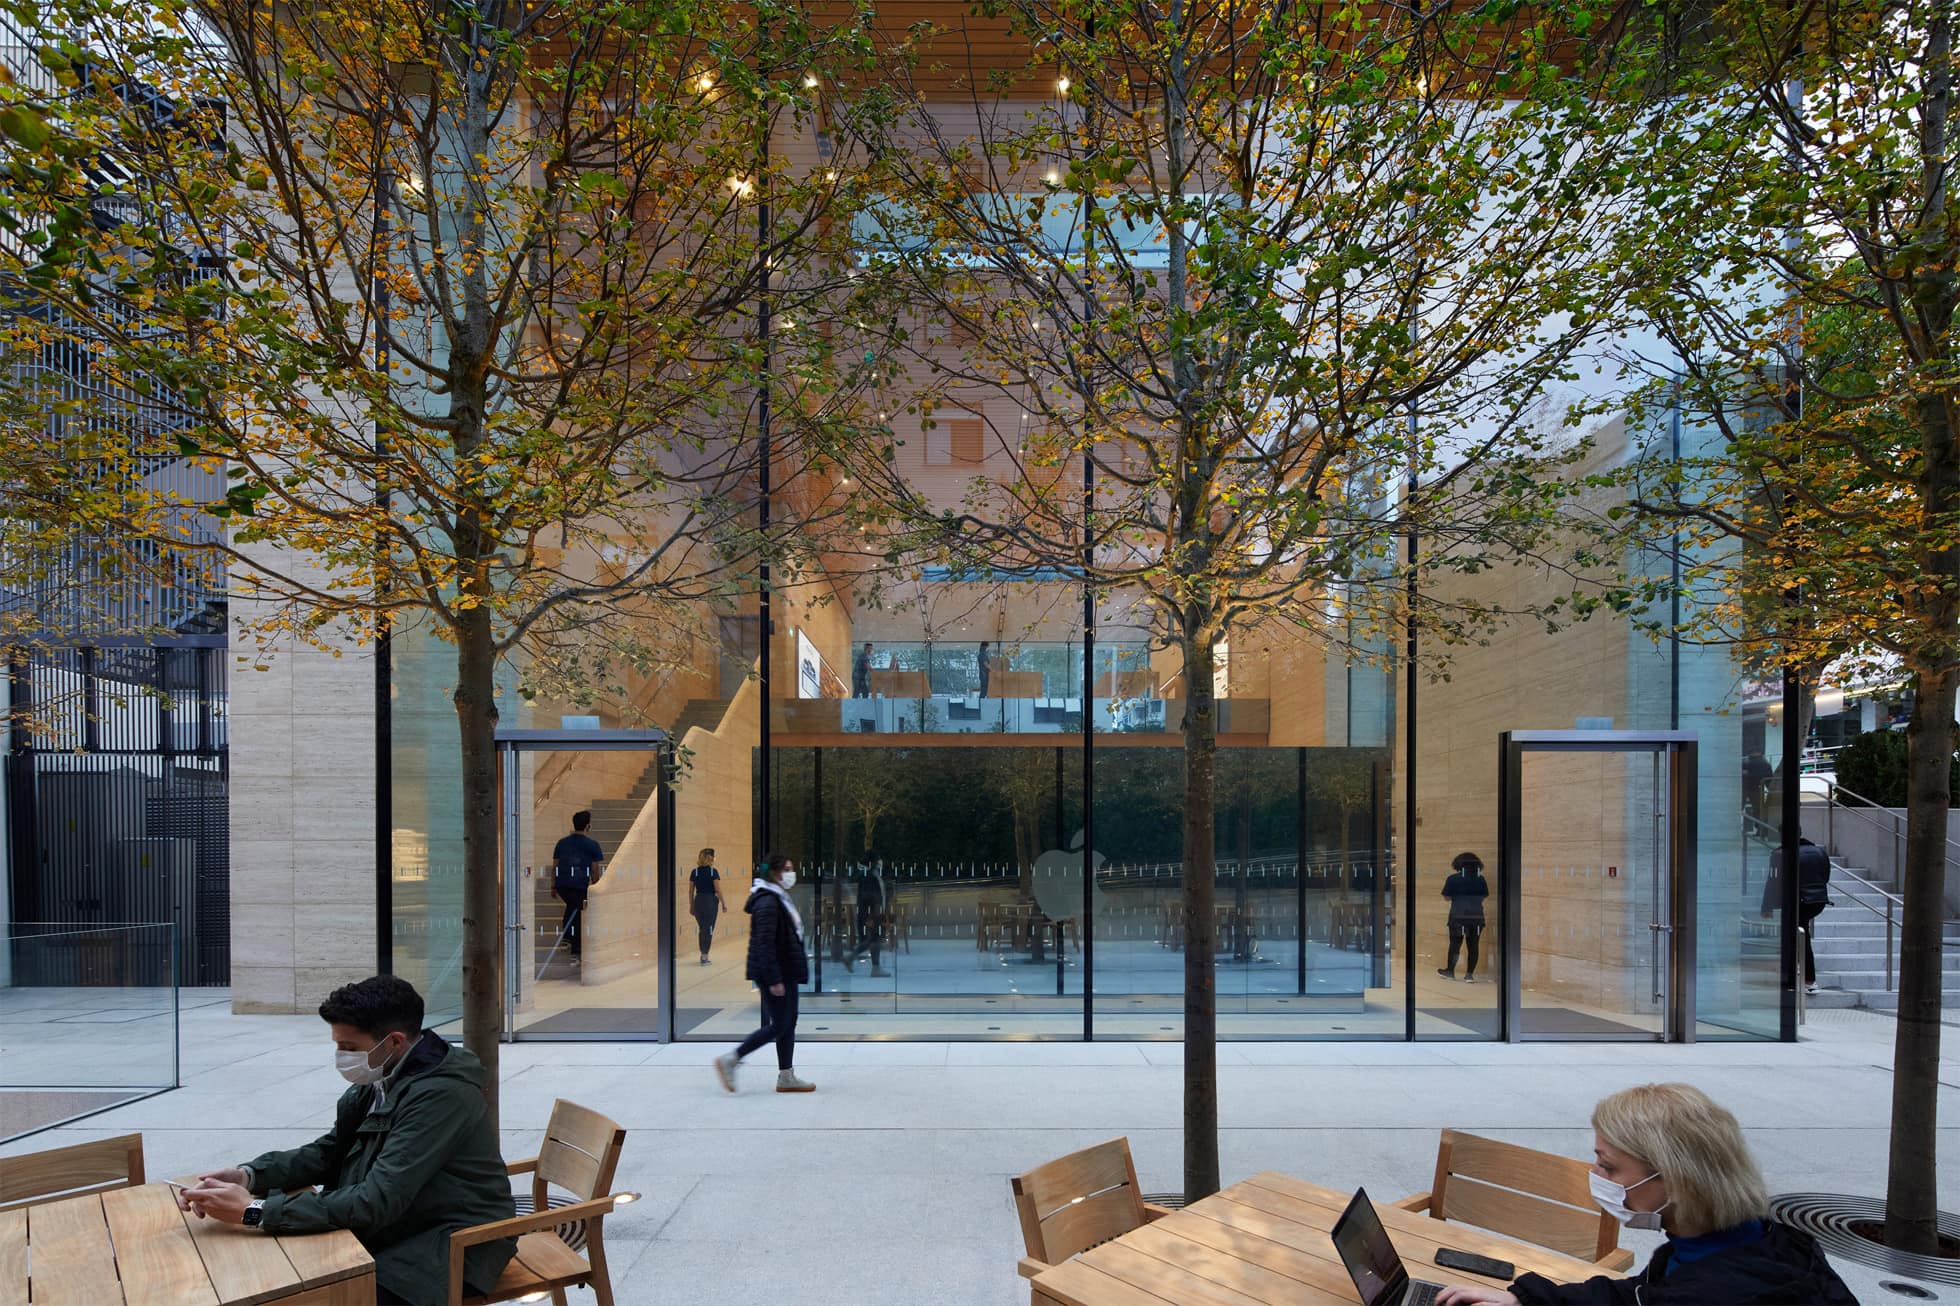 Apple Bağdat Caddesi creates an urban oasis in the heart of the city, complete with a tree-filled garden.